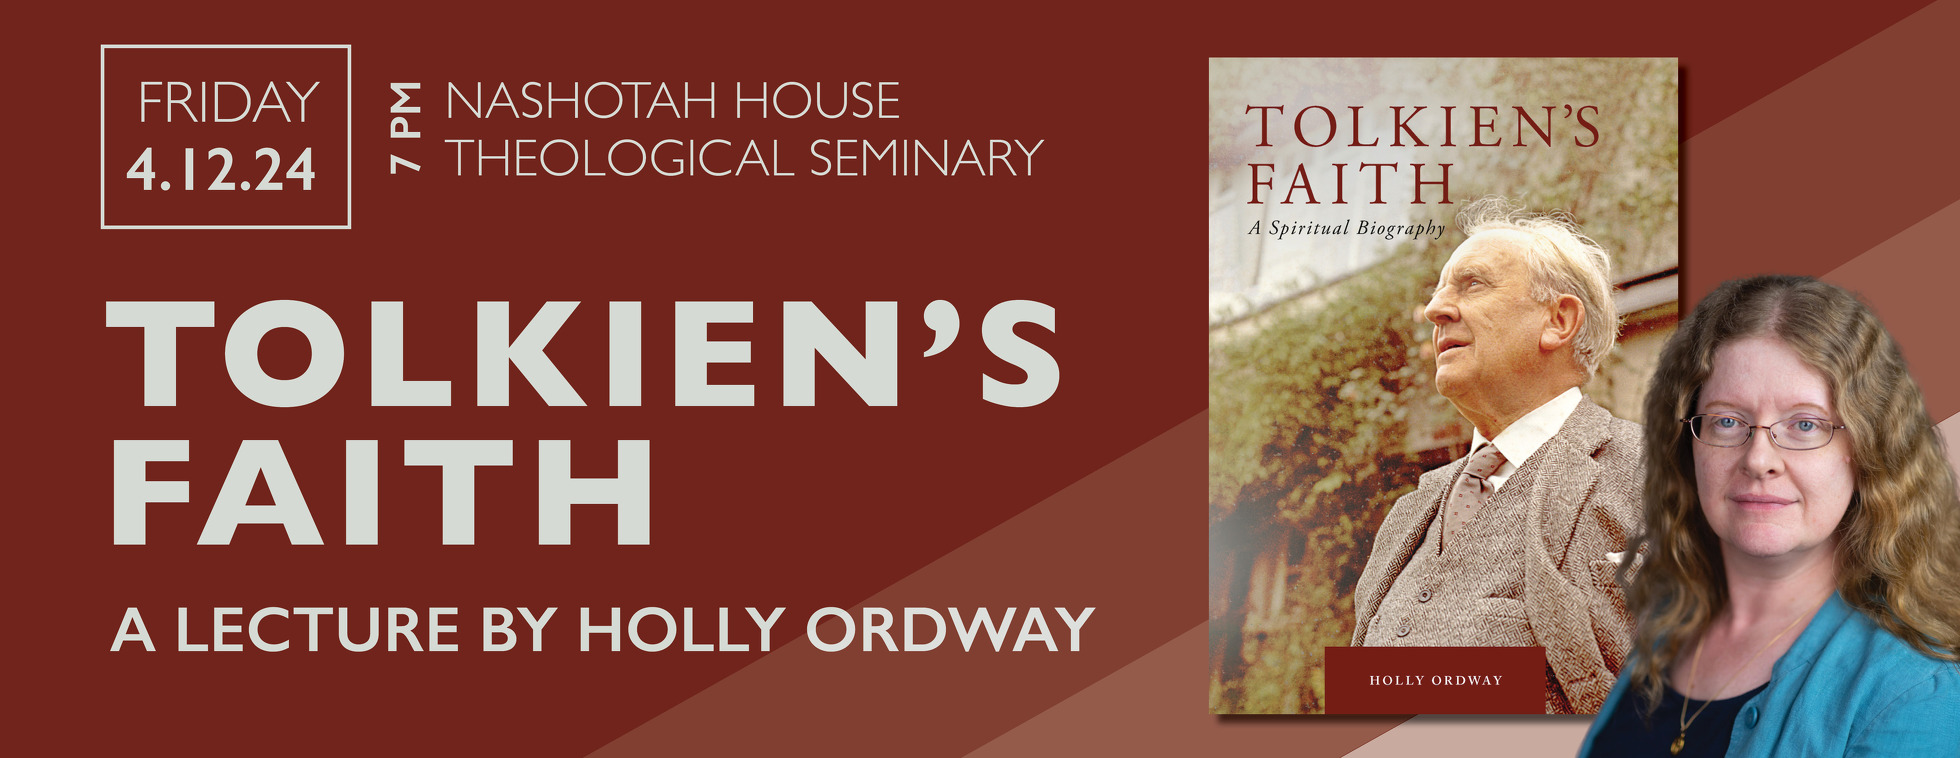 Tolkien's Faith: Holly Ordway on J. R. R. Tolkien’s Spiritual Biography